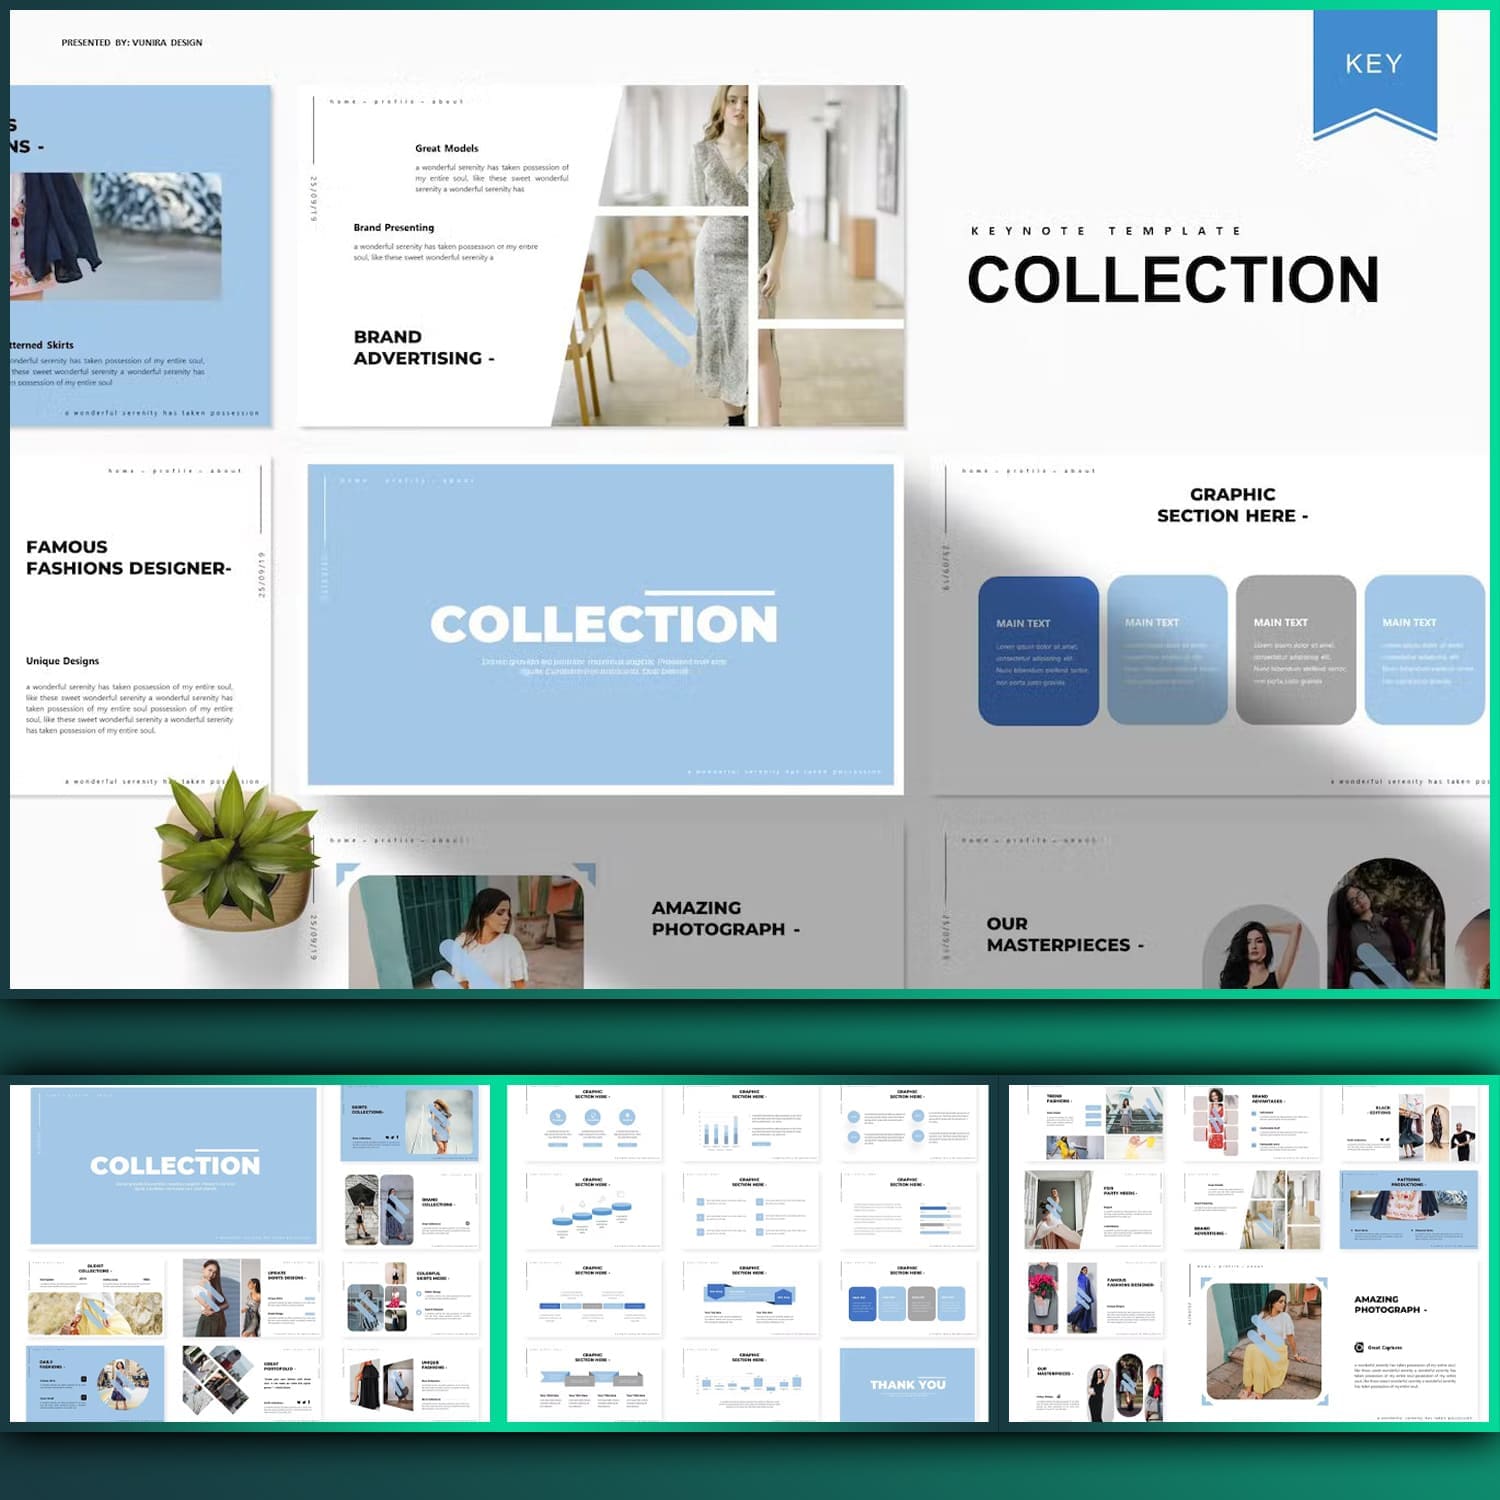 Collection keynote template, main image 1500x1500.